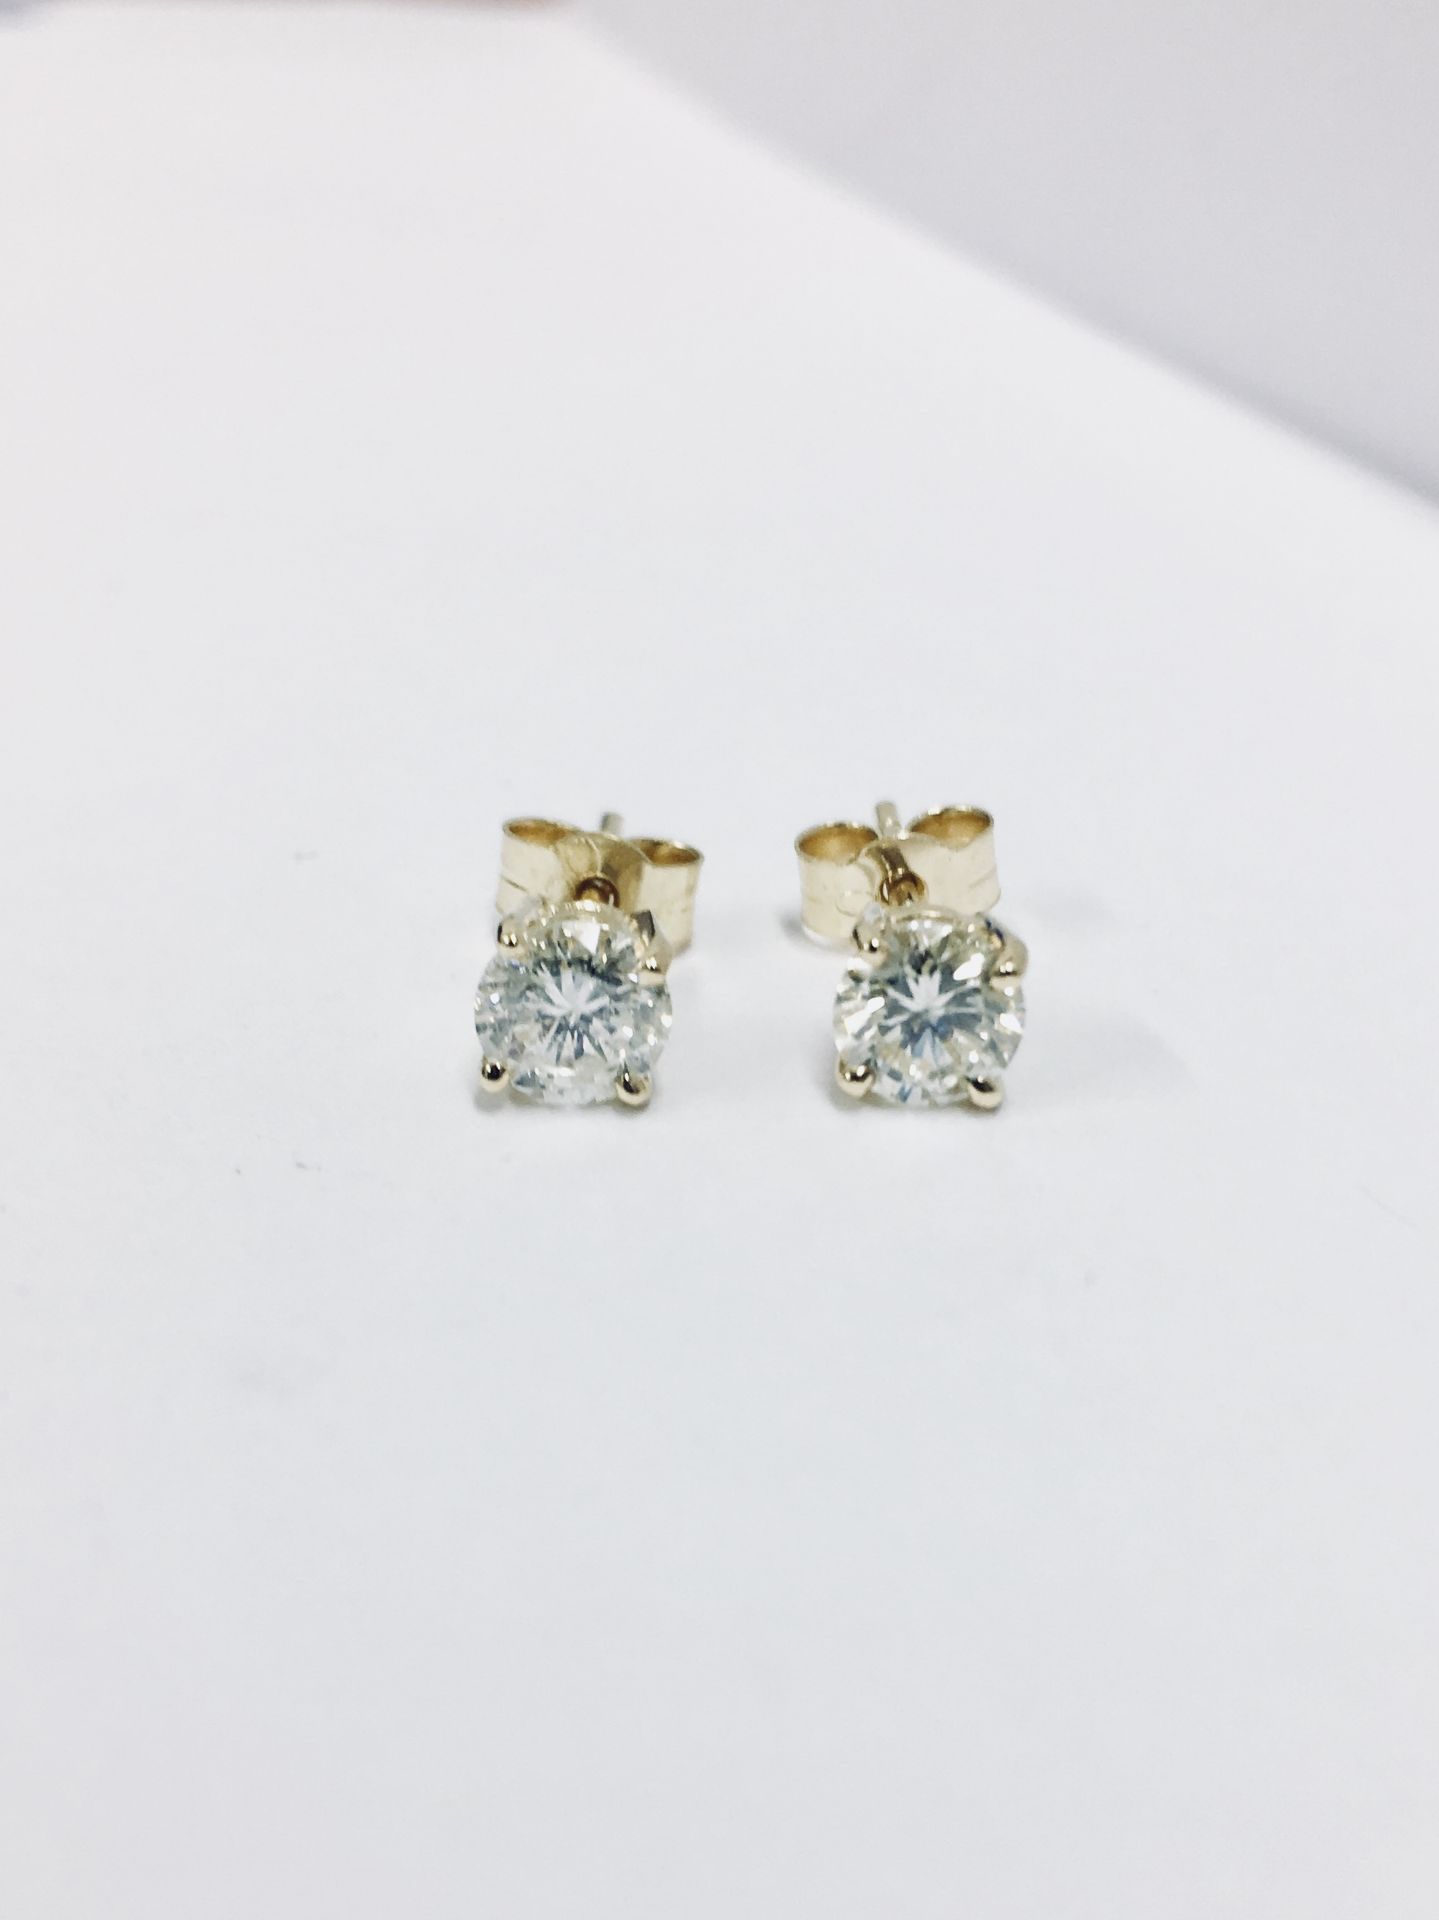 1.40Ct Diamond Solitaire Earrings Set With Brilliant Cut Diamonds, - Image 16 of 19